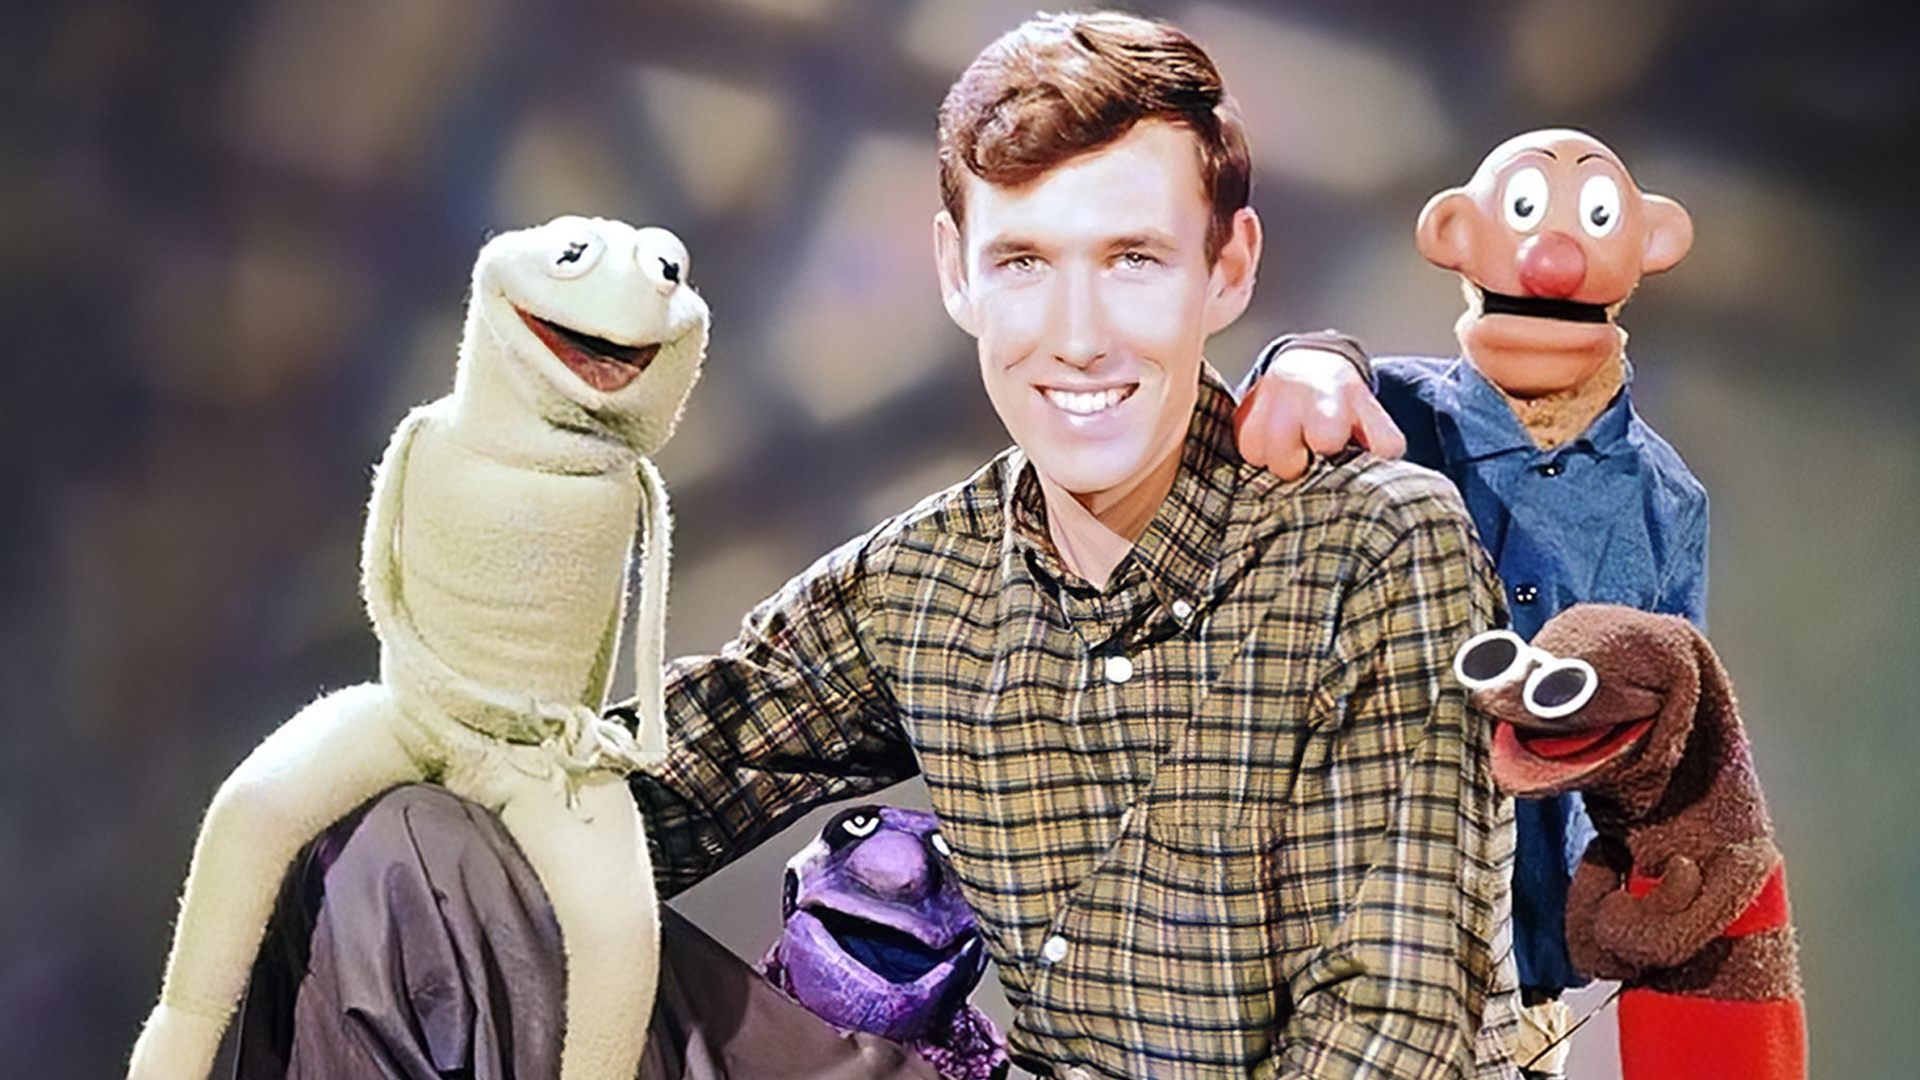 Official movie puppets made by Jim Henson studios! Who else is excited